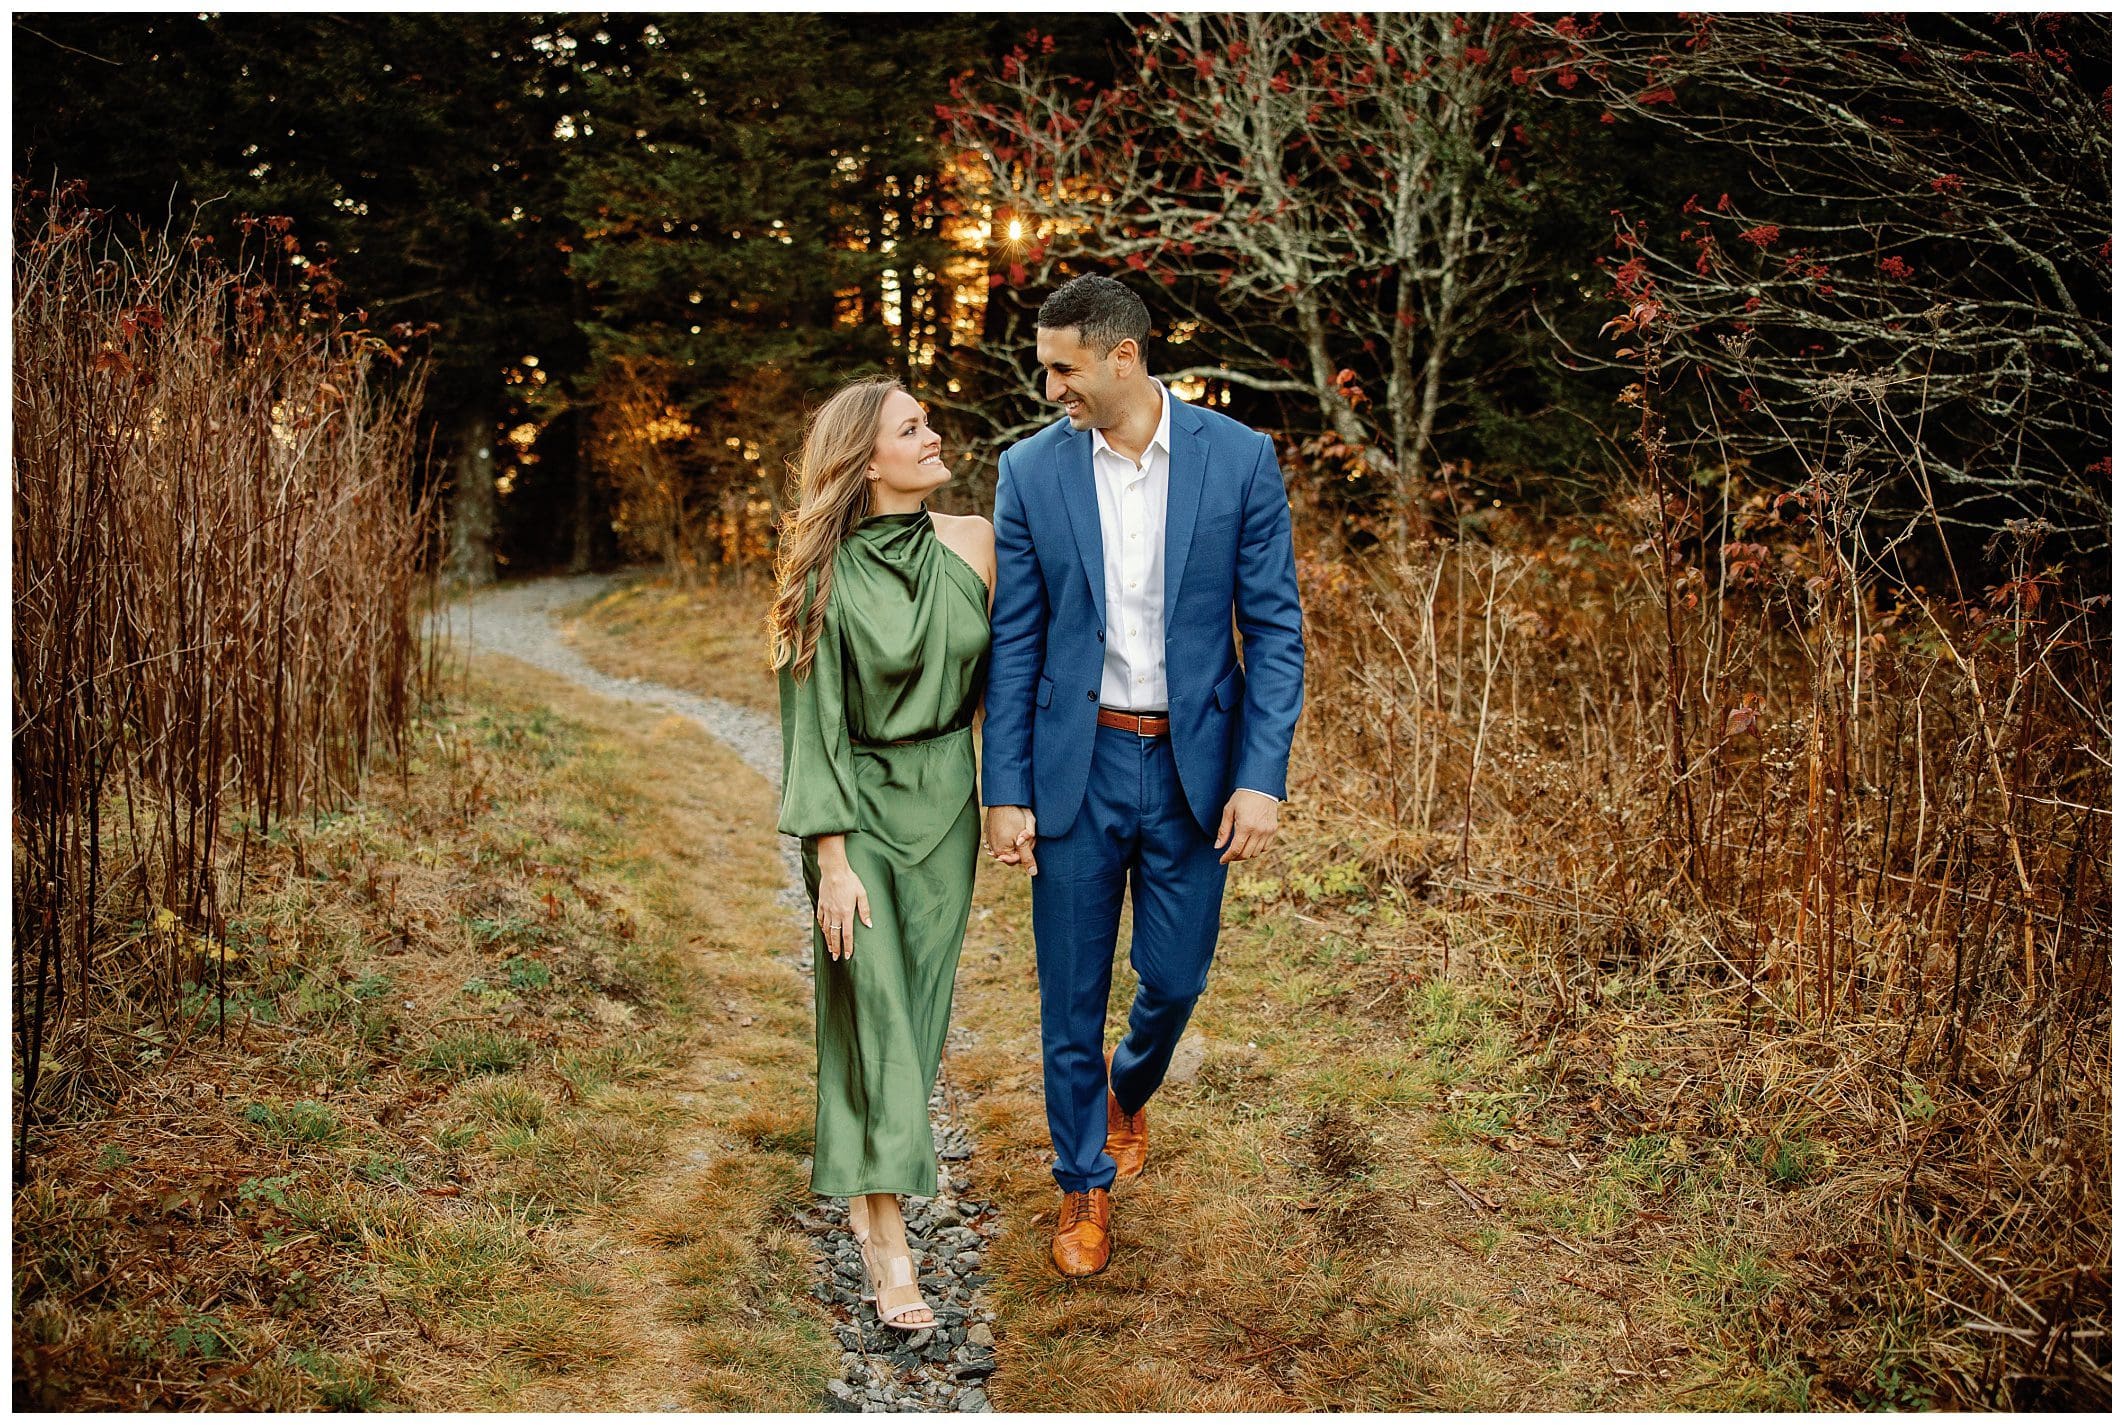 A couple enjoying their sunrise engagement walk together on a path surrounded by autumn foliage.